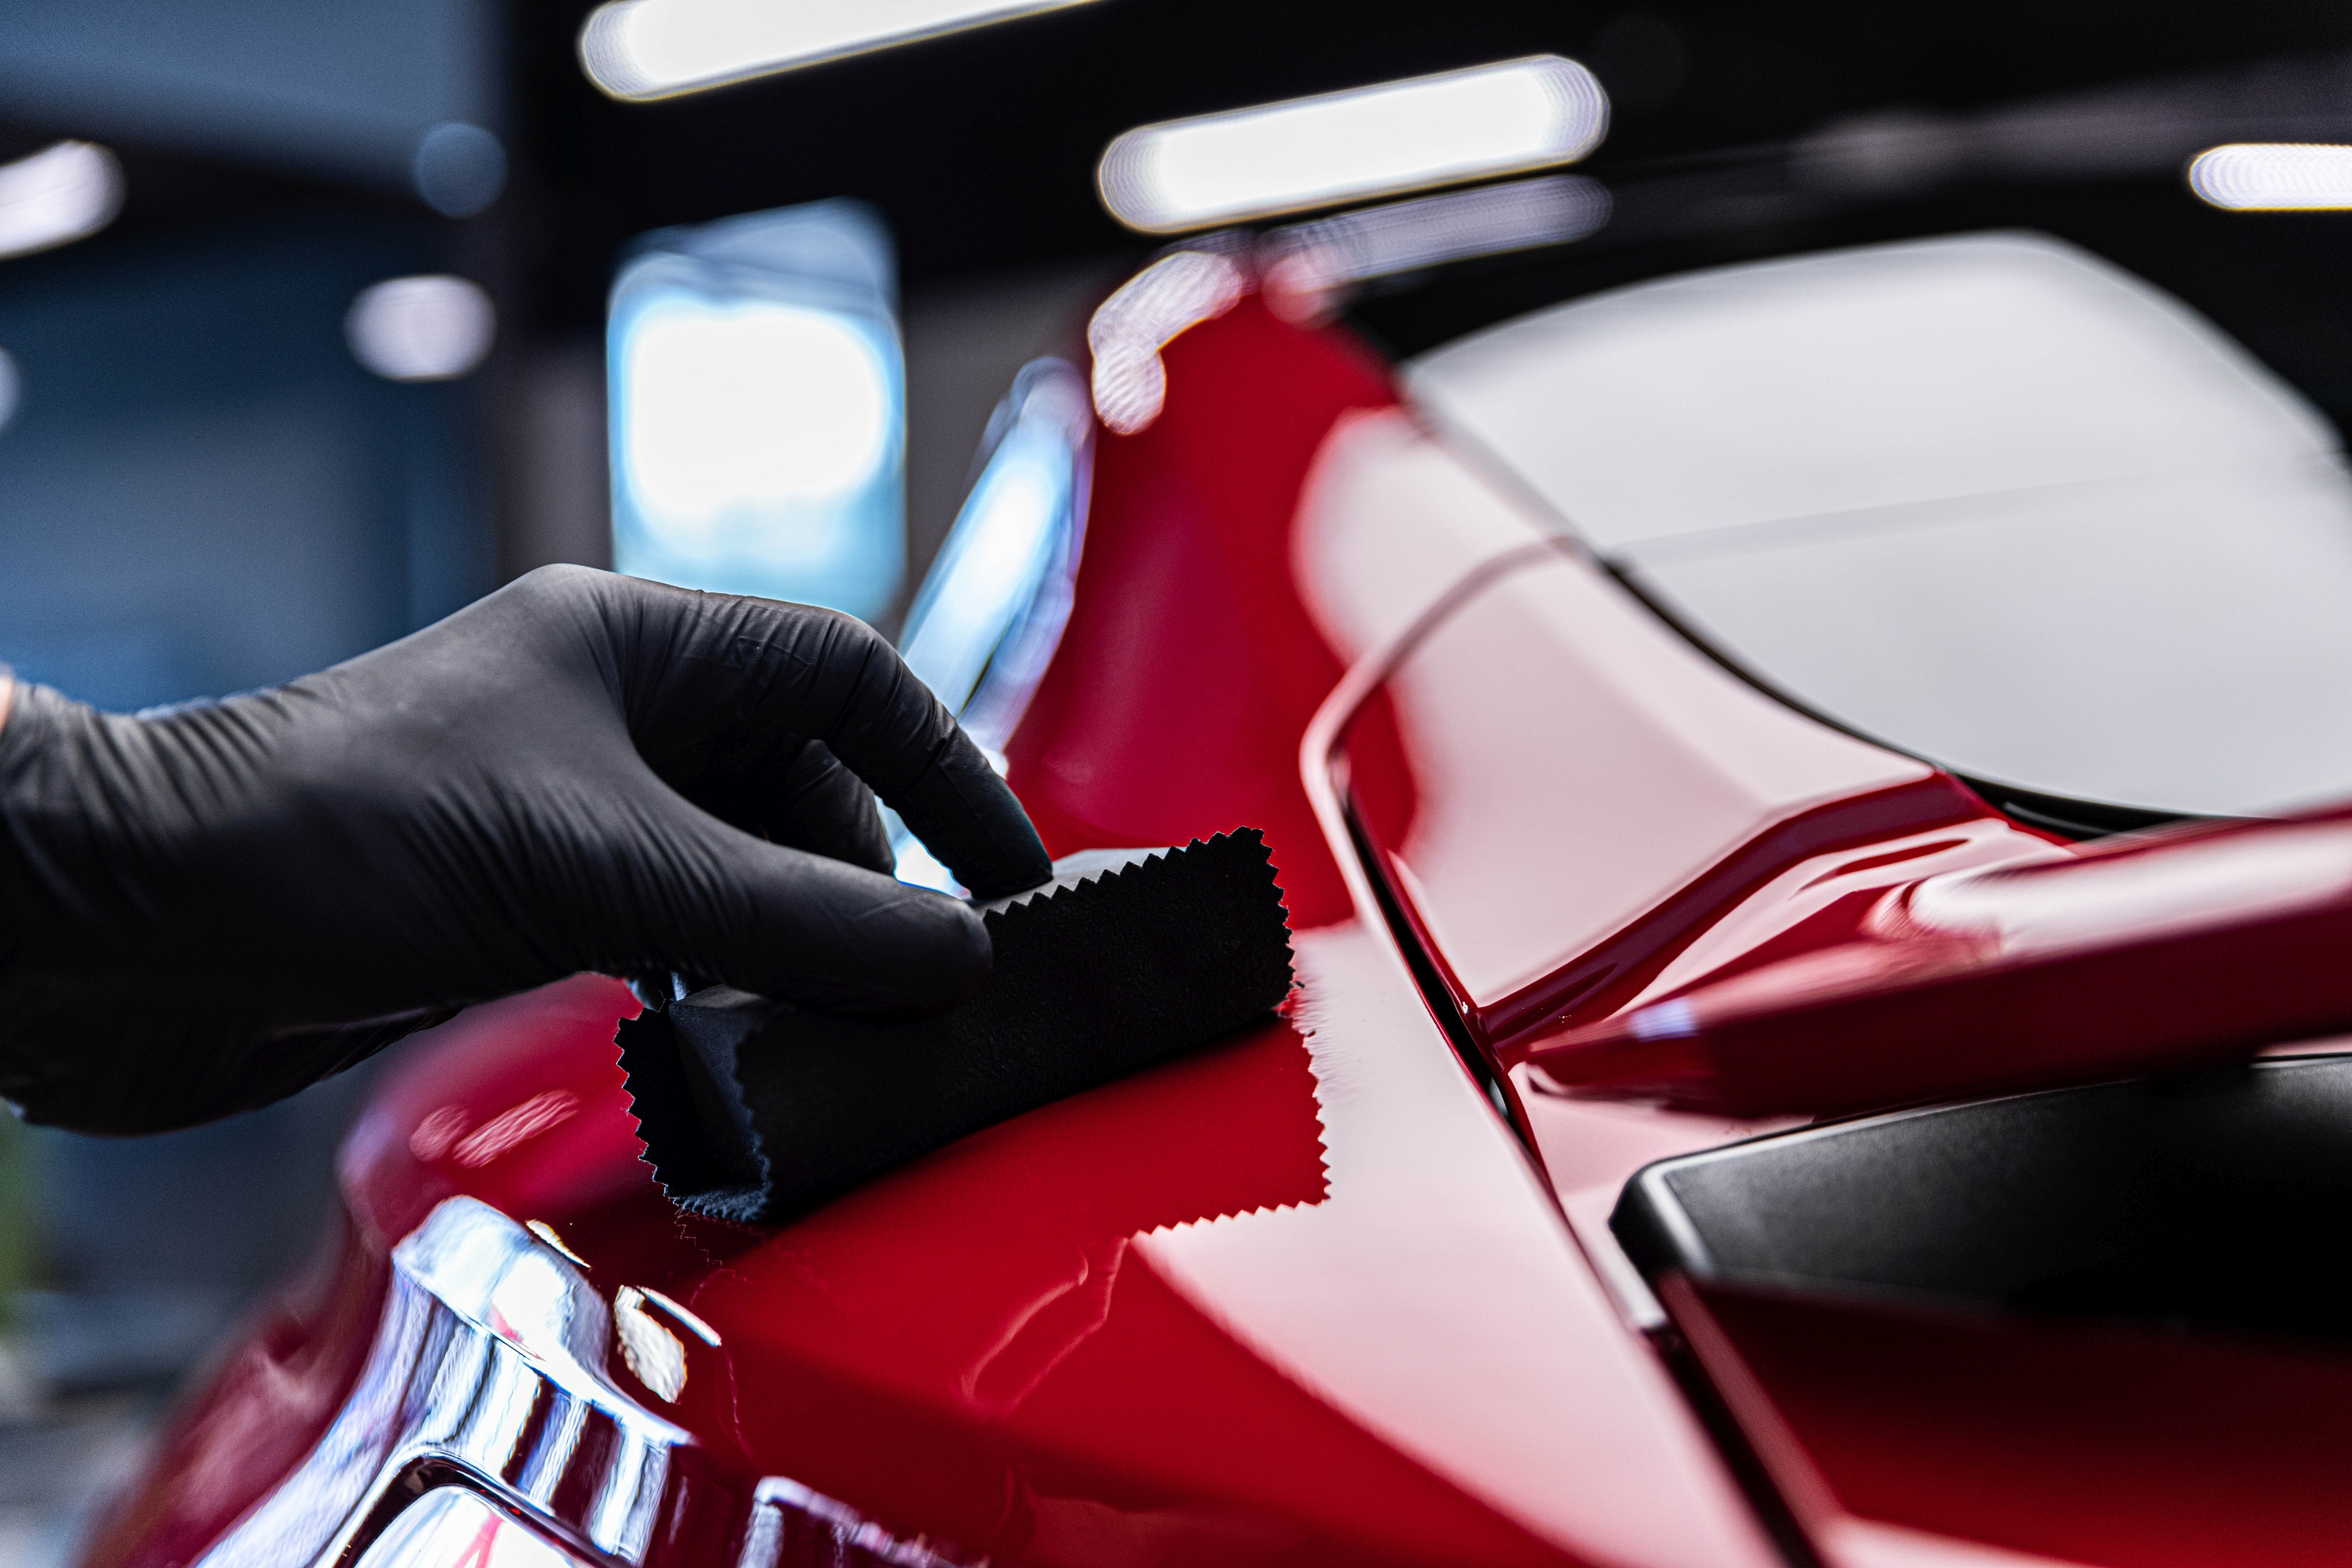 The Science Behind Ceramic Coating: How Is It Done